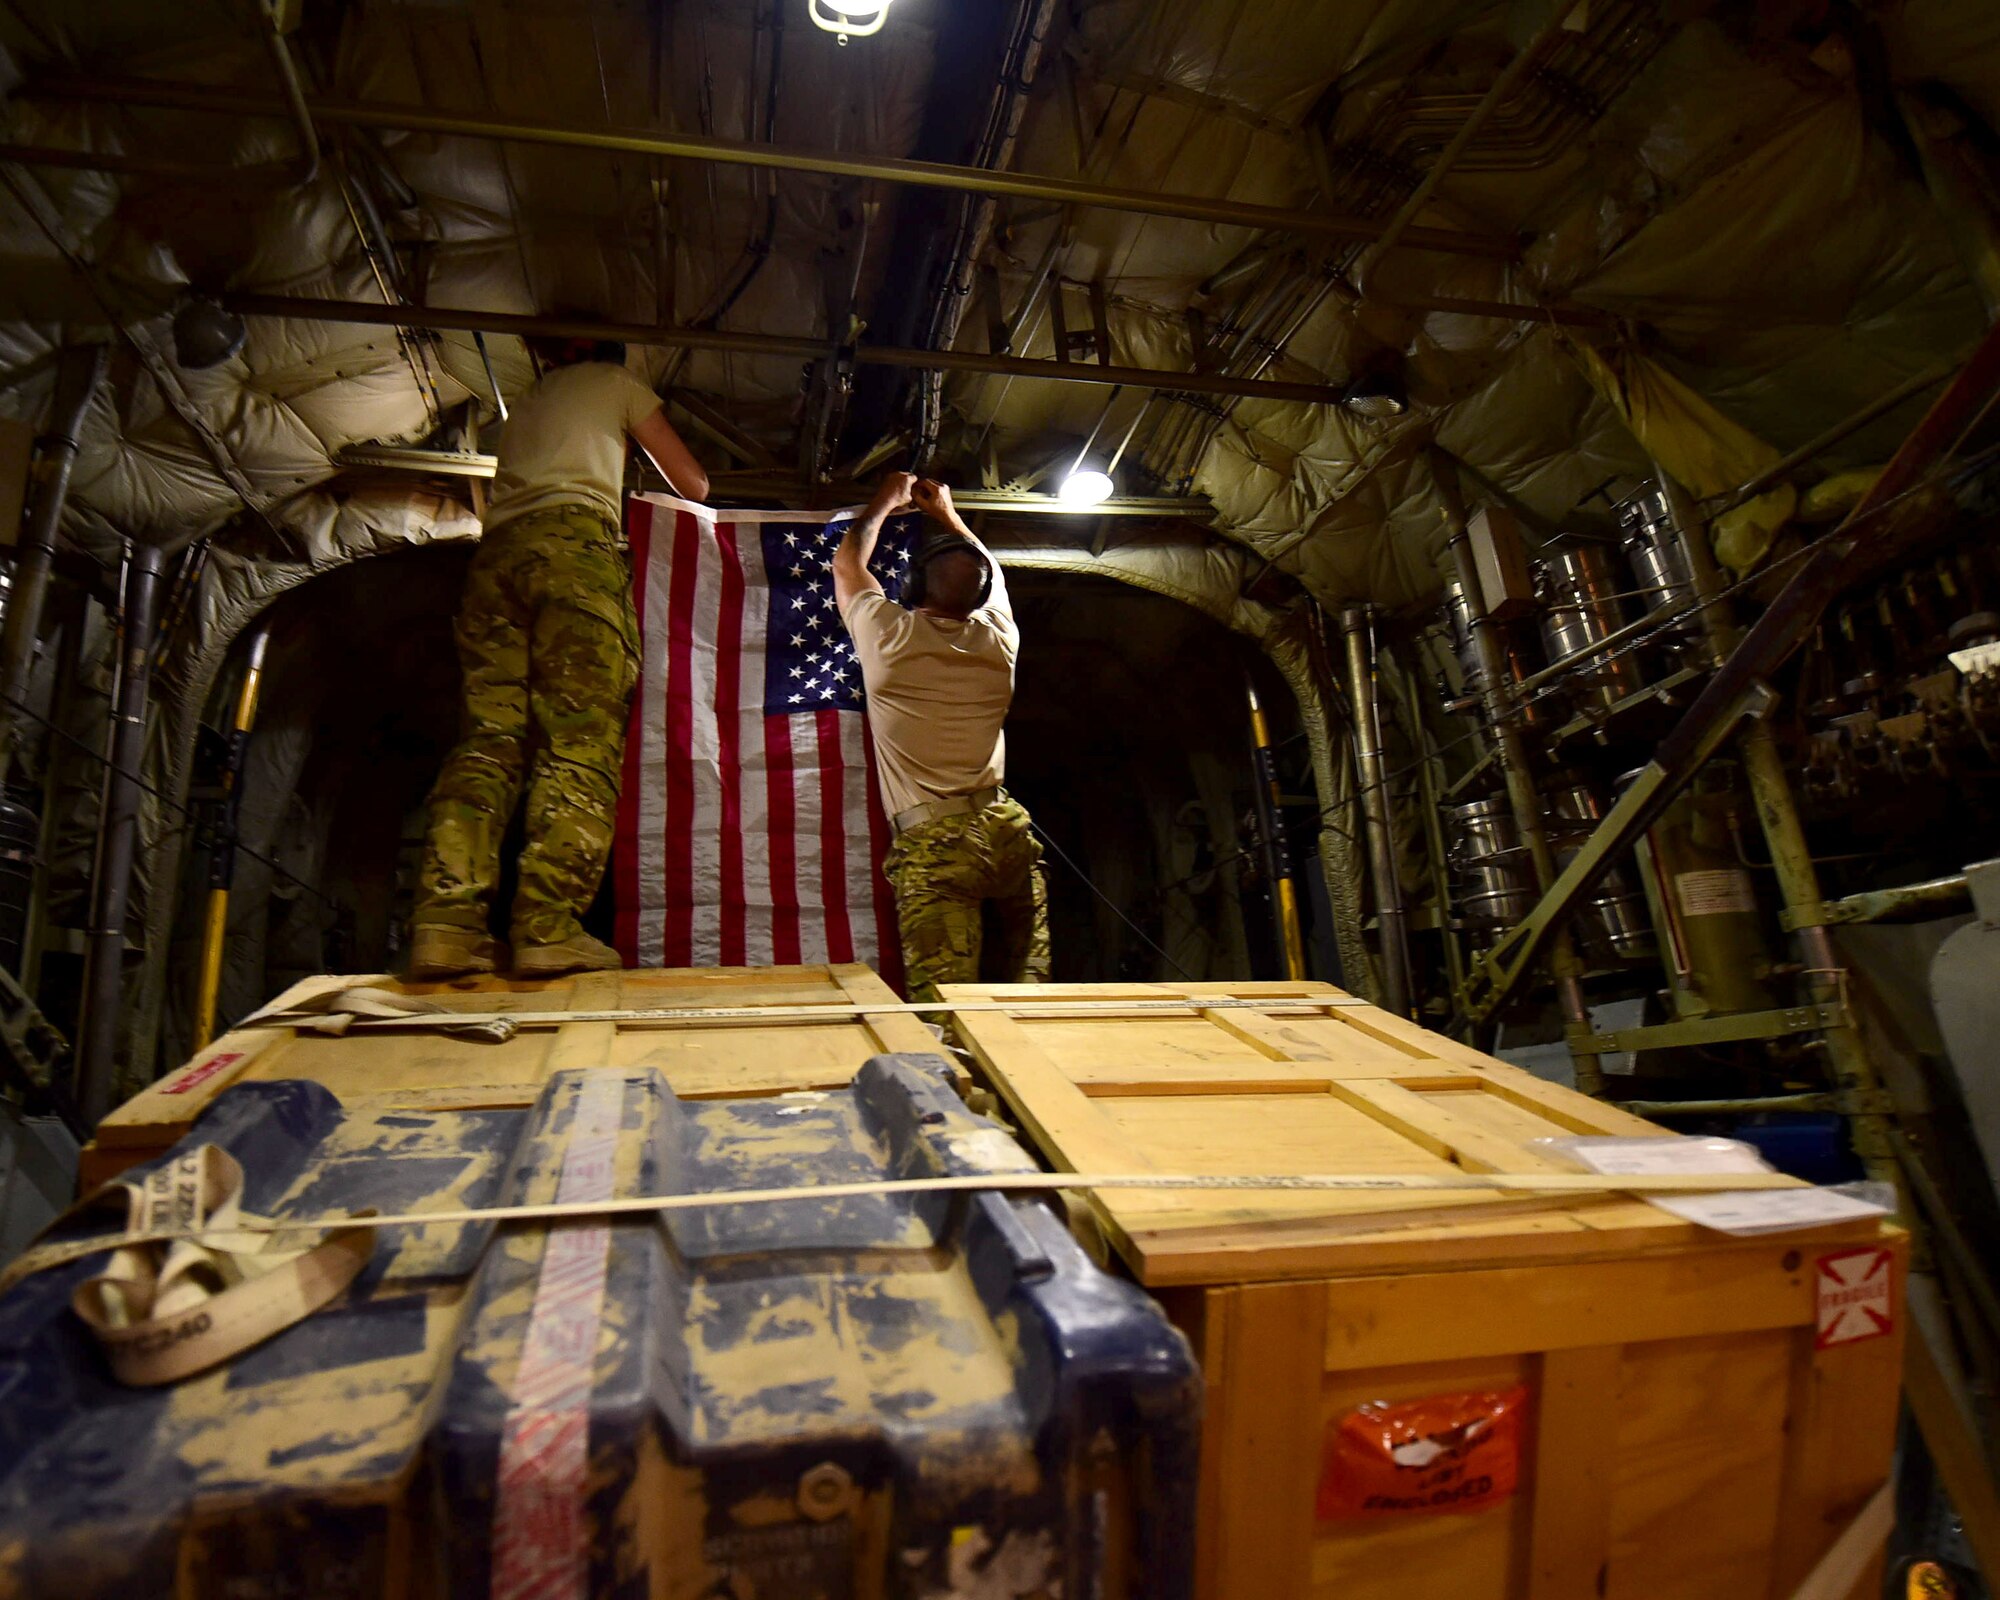 Senior Airman Erin Stewart, right, and Chief Master Sgt. Thomas Glover, 737th Expeditionary Airlift Squadron loadmasters, hang a U.S. flag onboard a C-130H Hercules during an airlift mission in Southwest Asia, Oct. 27, 2015. Stewart and Glover are two of nearly one hundred members deployed from the 192nd Airlift Squadron based out of Reno, Nevada. Their team has flown more than 600 missions during their deployment. (U.S. Air Force photo by Staff Sgt. Jerilyn Quintanilla)